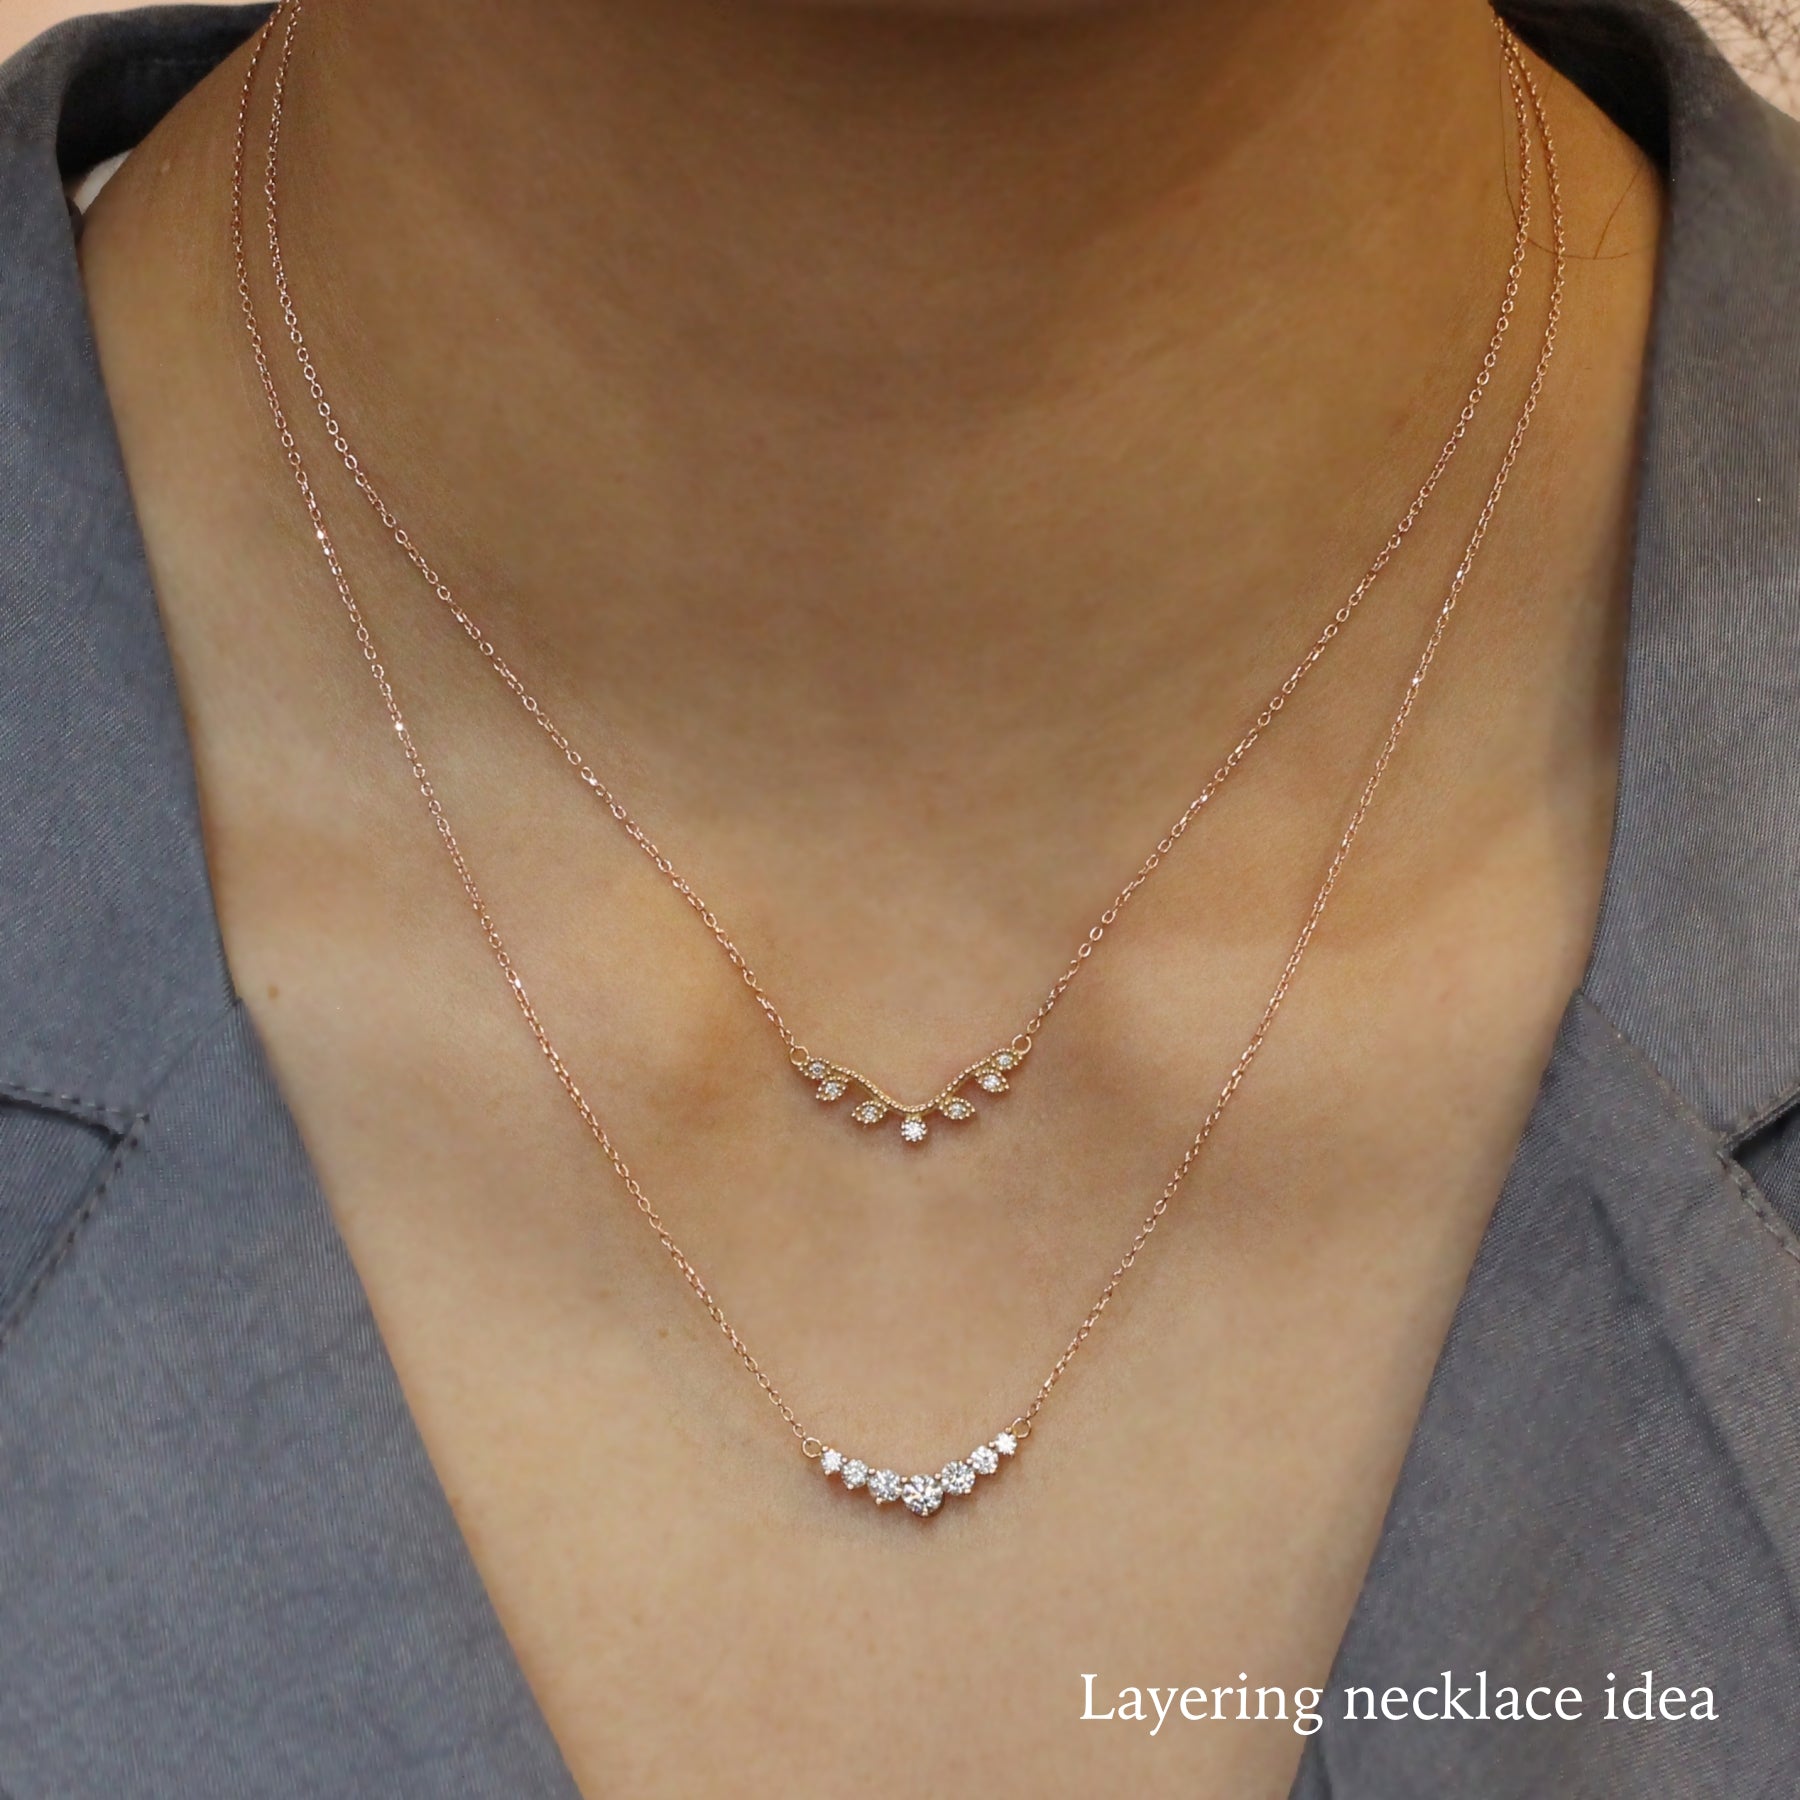 Layering necklaces, layered necklaces La More Design Jewelry